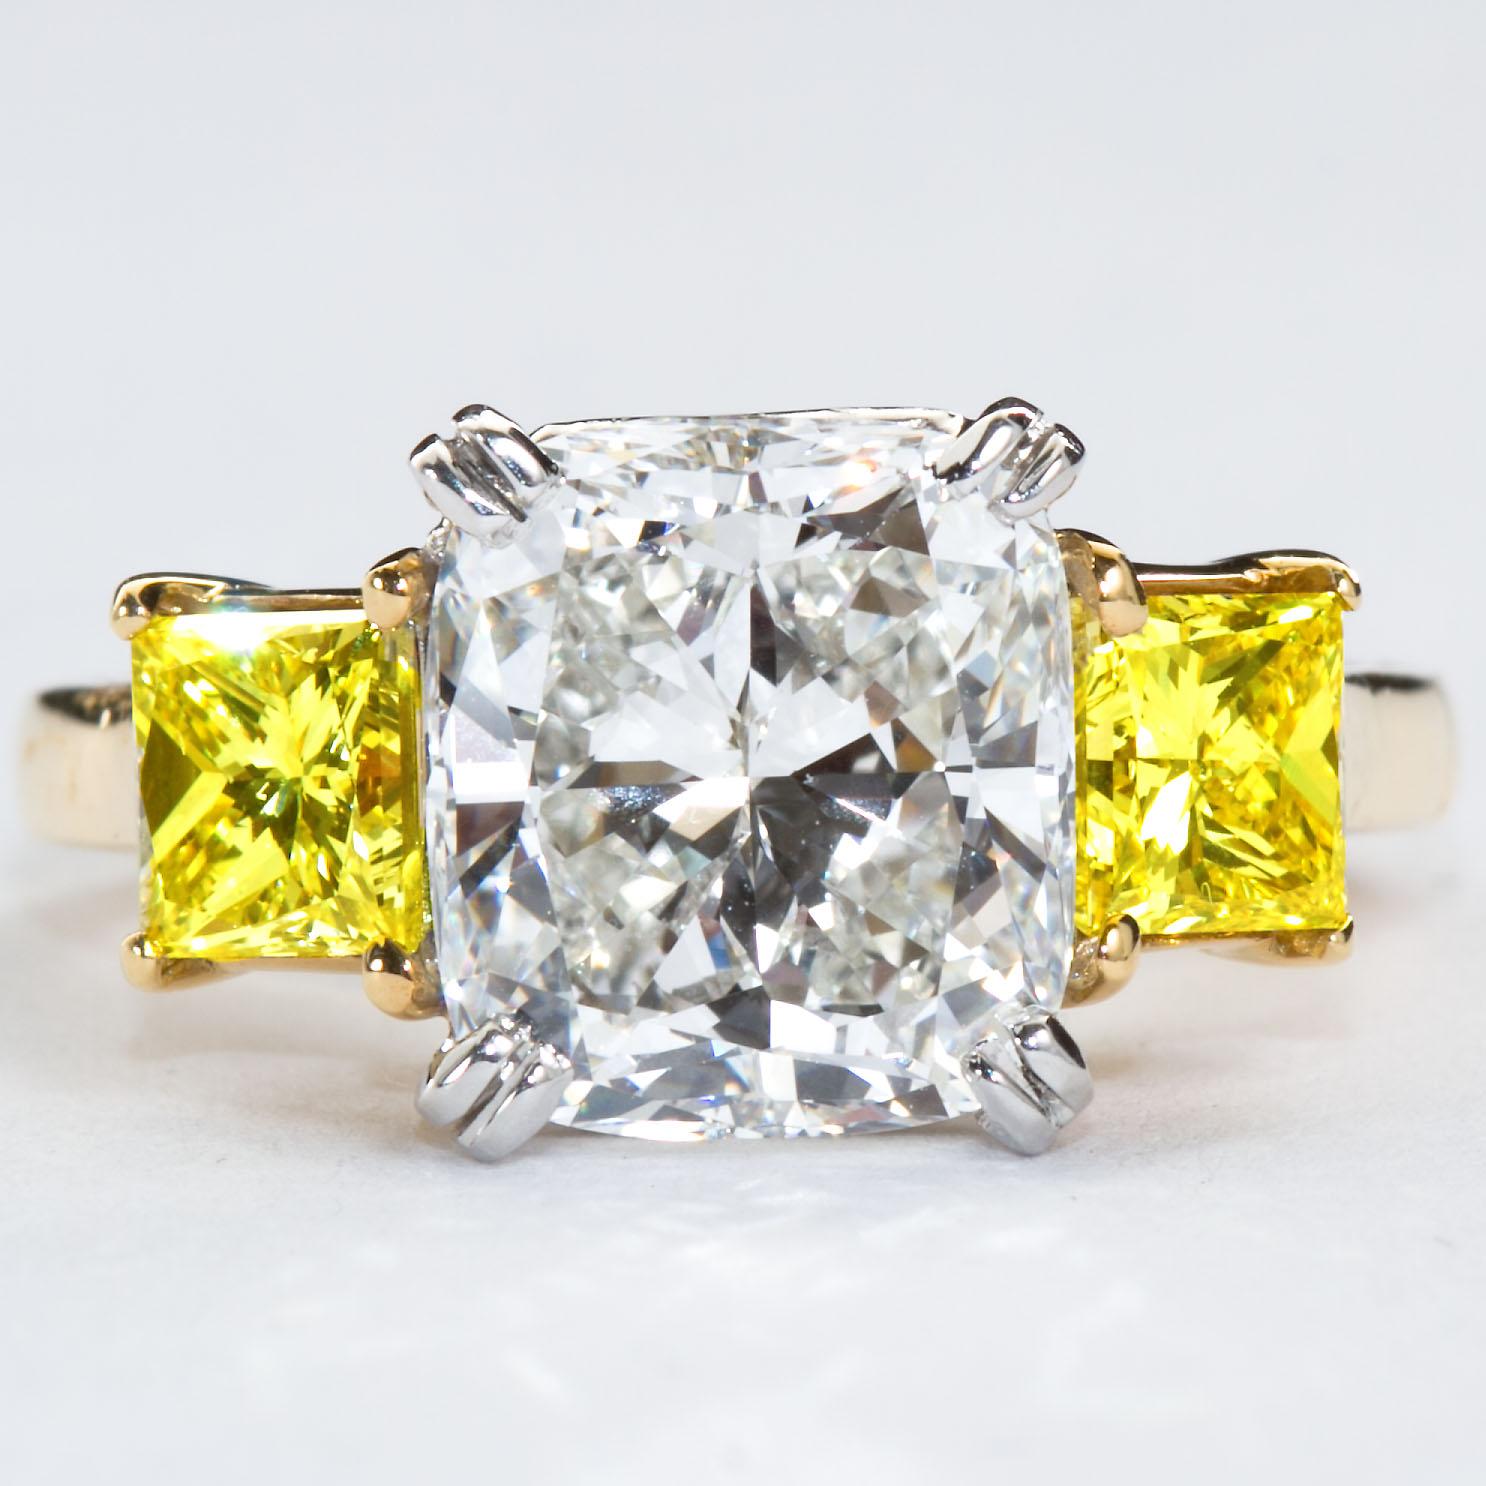 Women's 3.55 Carat Cushion Cut Diamond and Fancy Intense Yellow Princess Sides Ring GIA For Sale